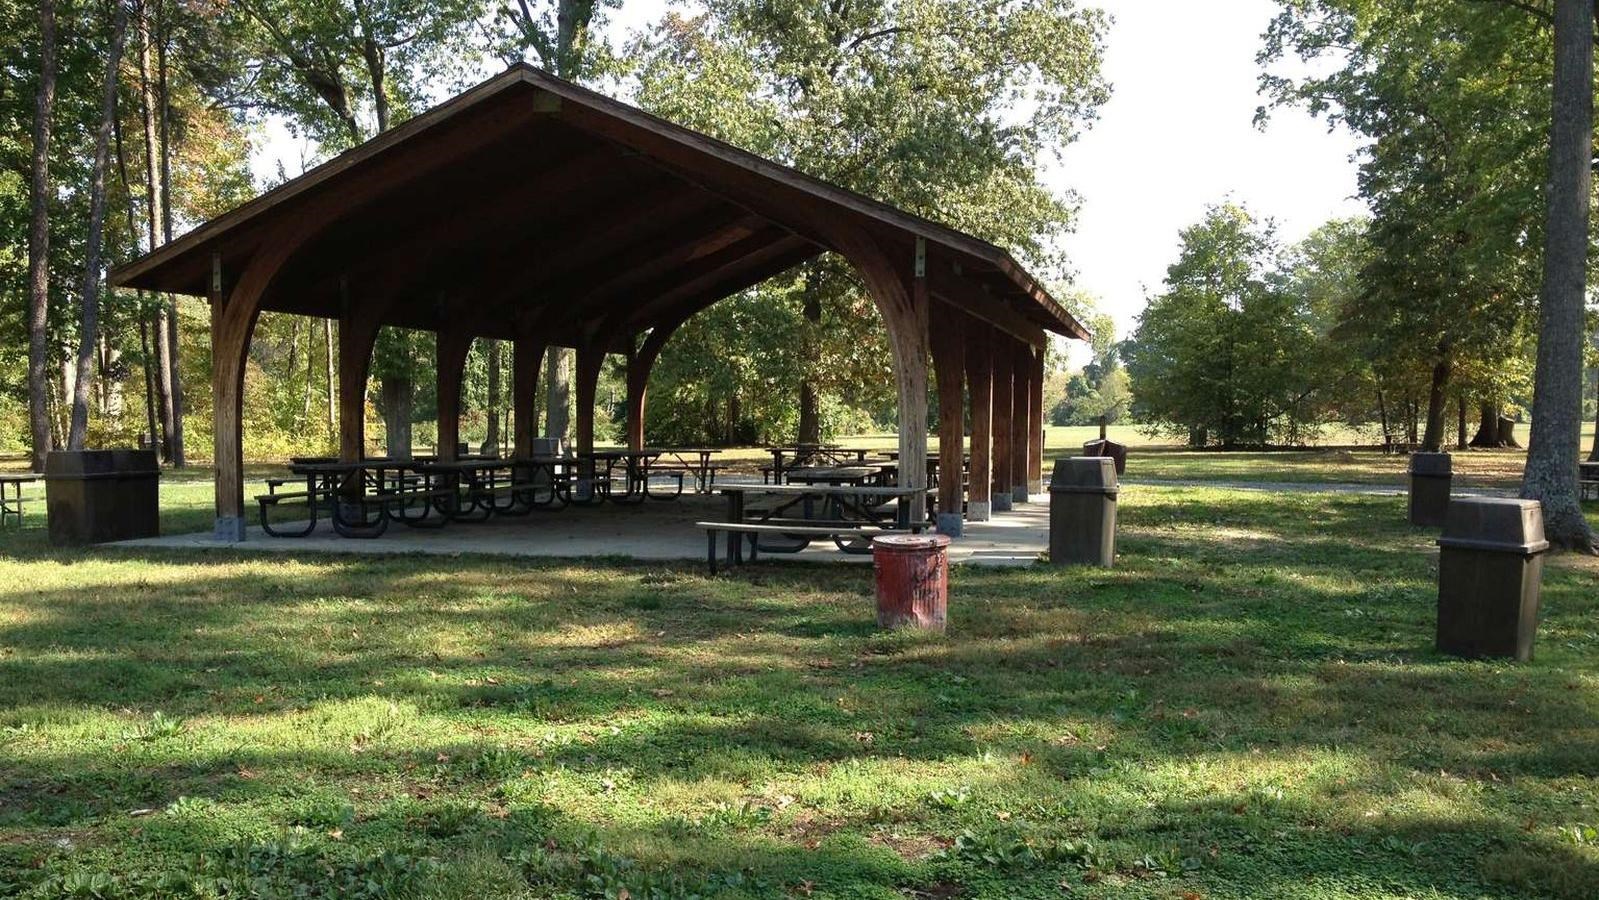 A wooden picnic pavilion structure covers picnic tables in a grassy field with trees in the summer